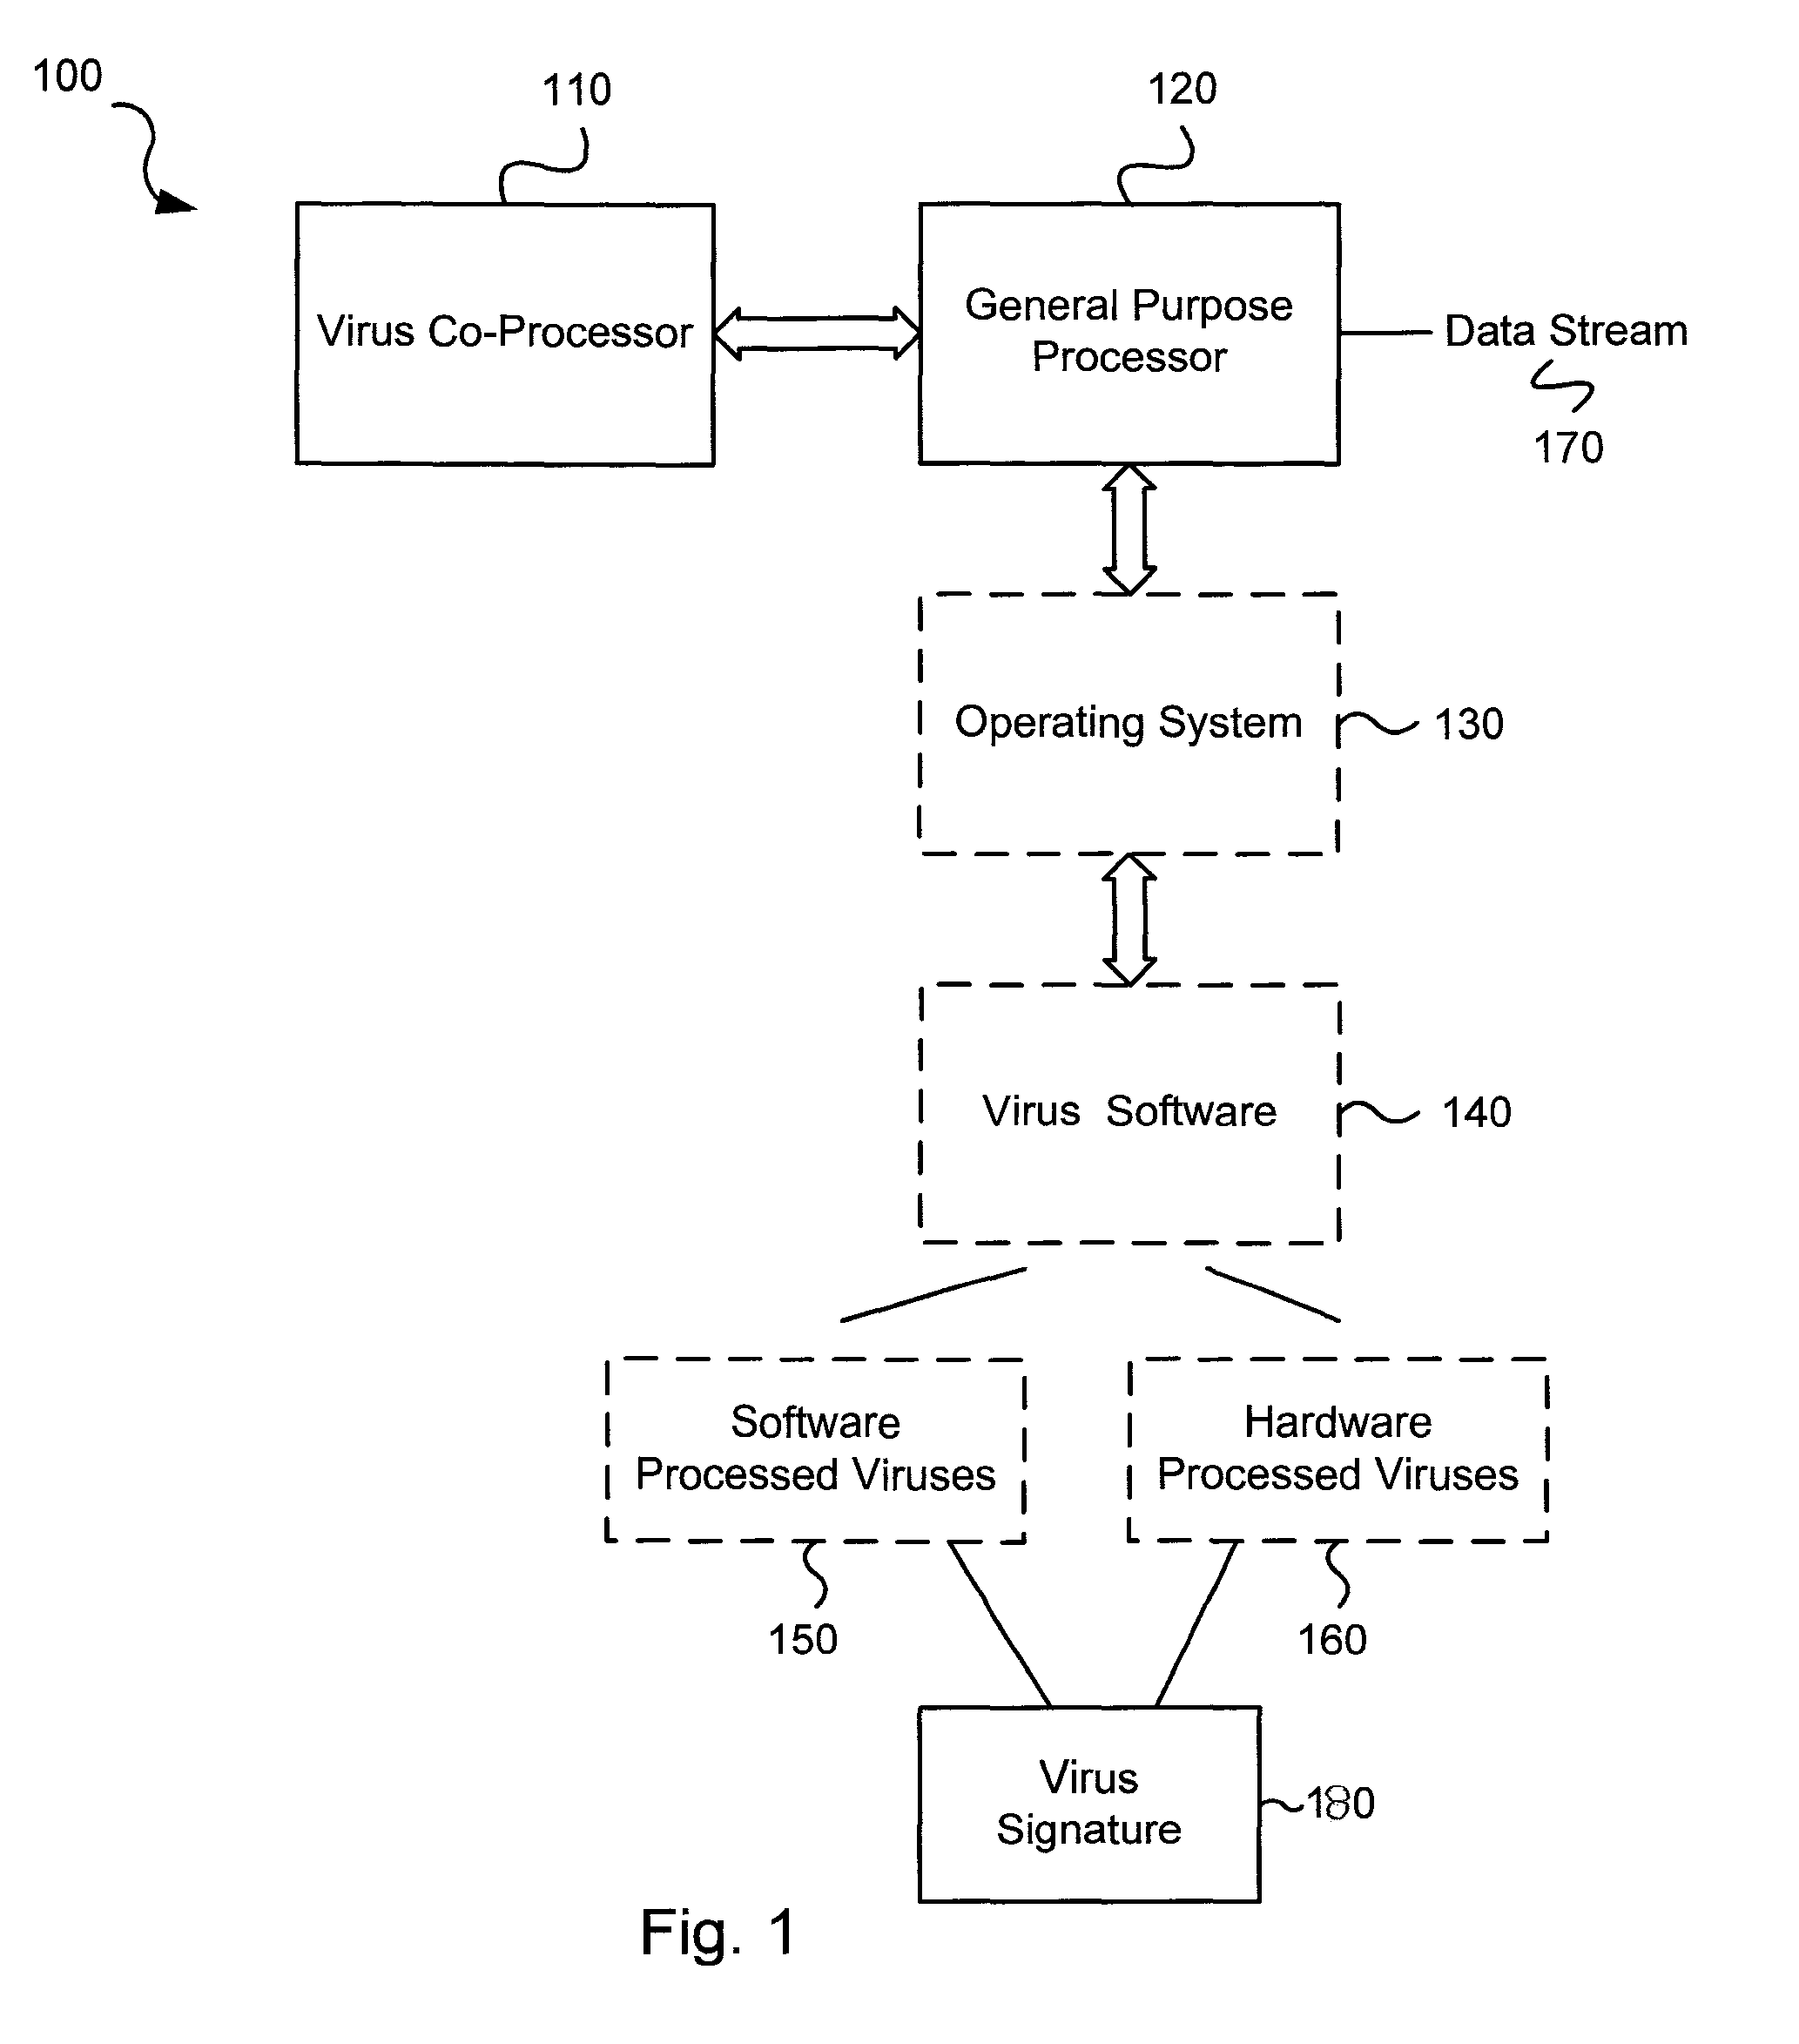 Efficient data transfer in a virus co-processing system